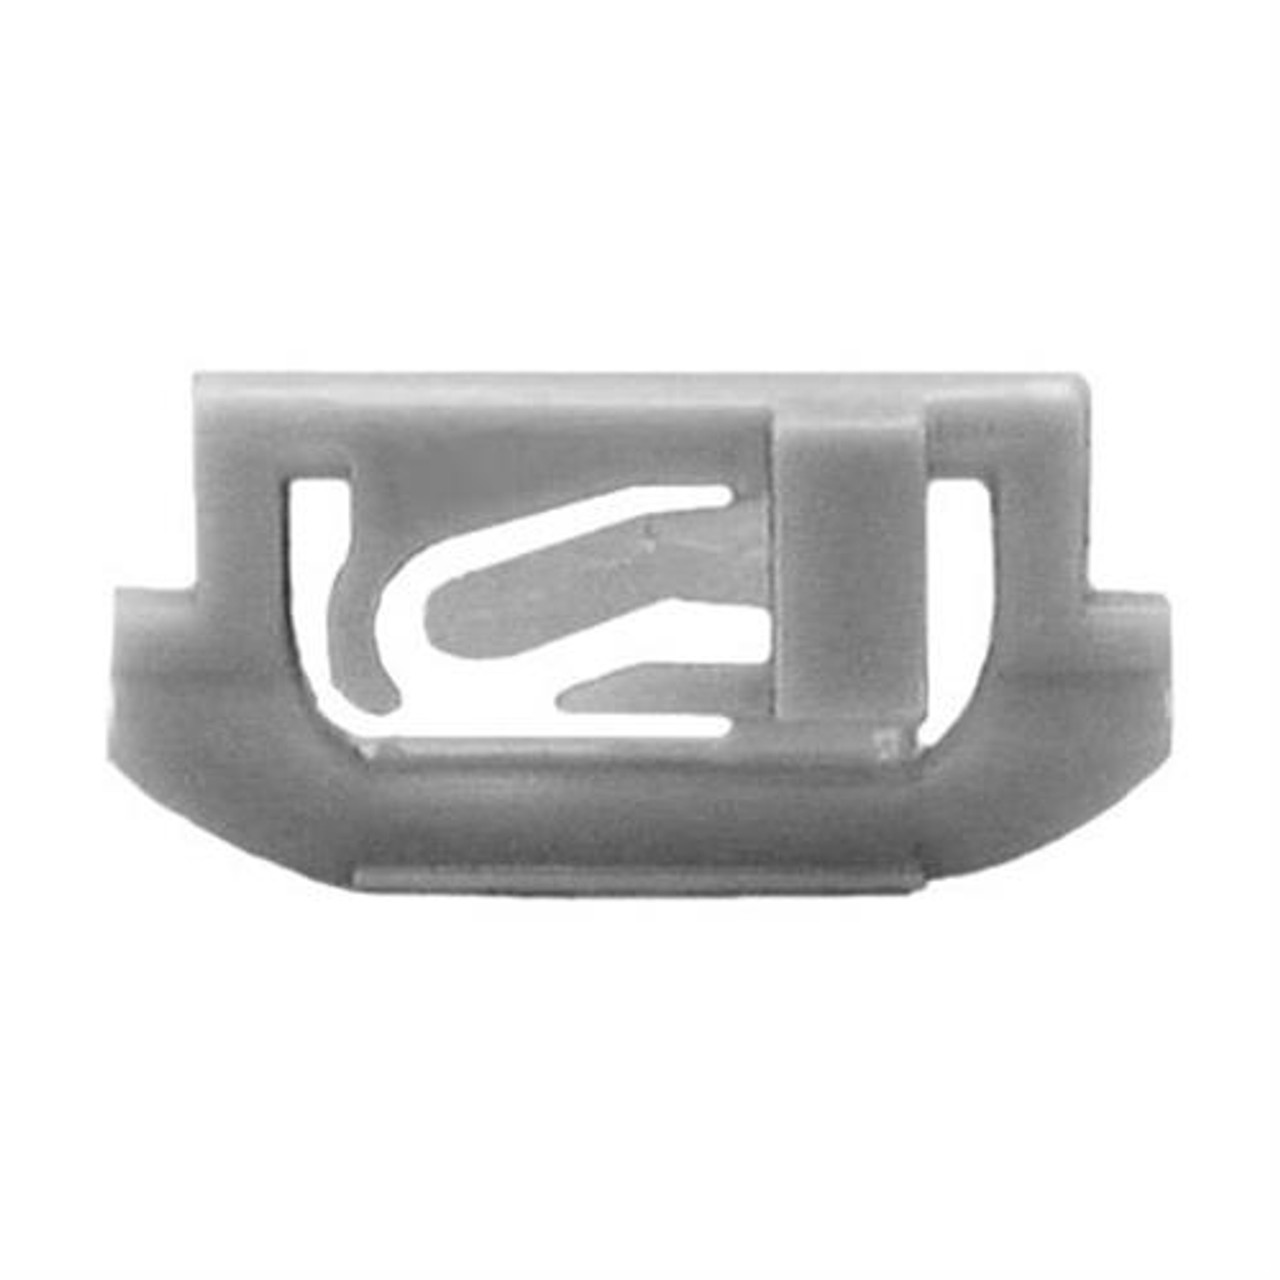 Window Reveal Moulding Clip, for GM 1654047 (Qty: 100)